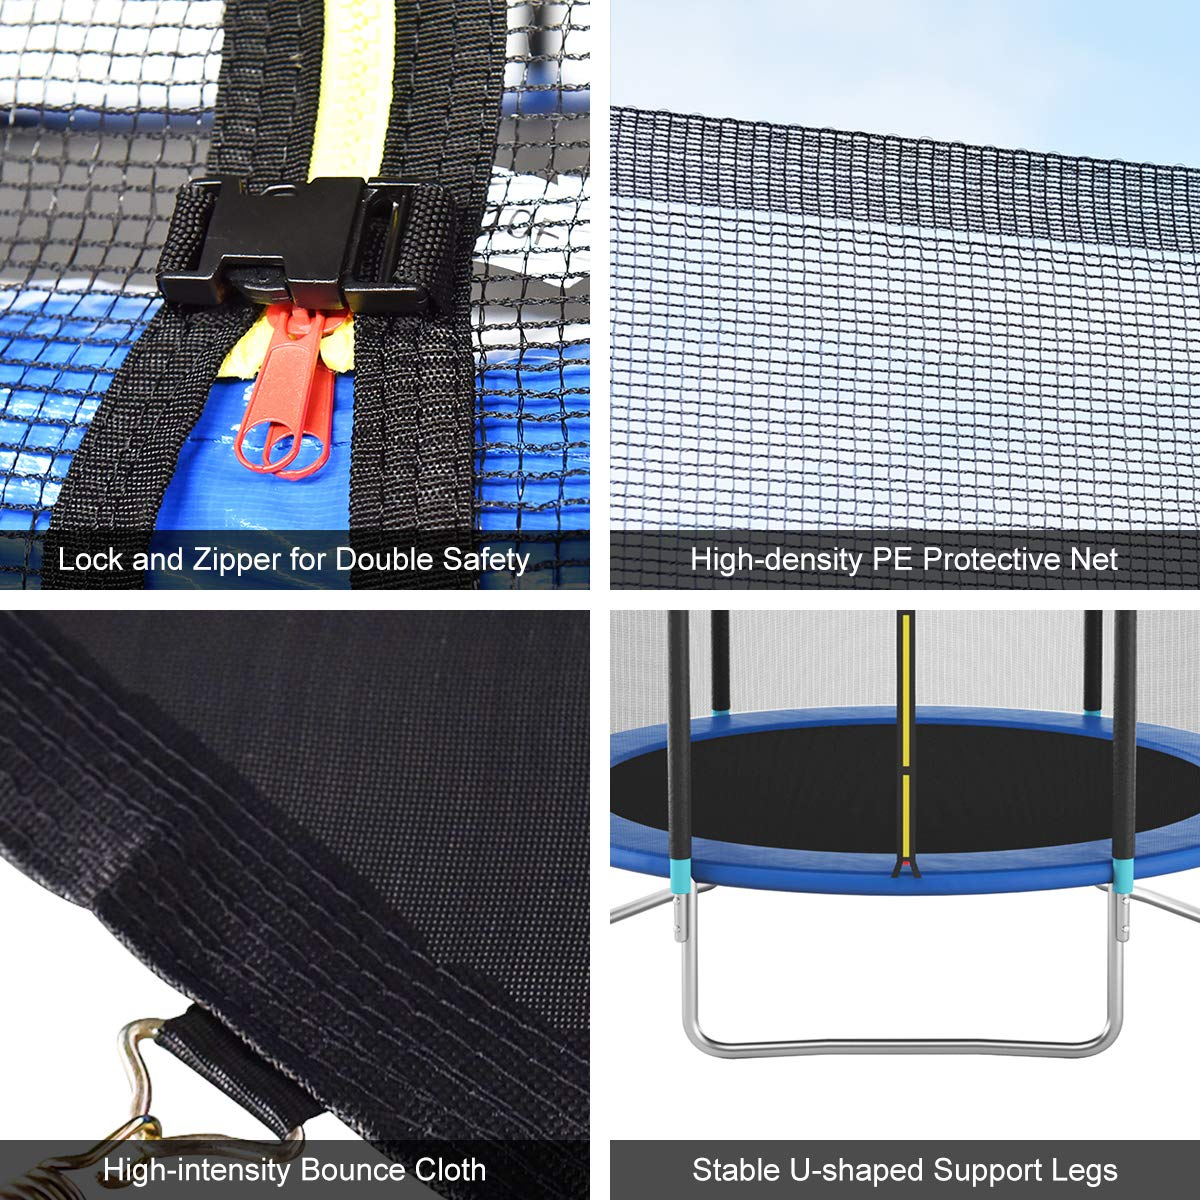 Giantex 8Ft Trampoline, ASTM Approved Outdoor Trampoline w/ Safety Enclosure Net